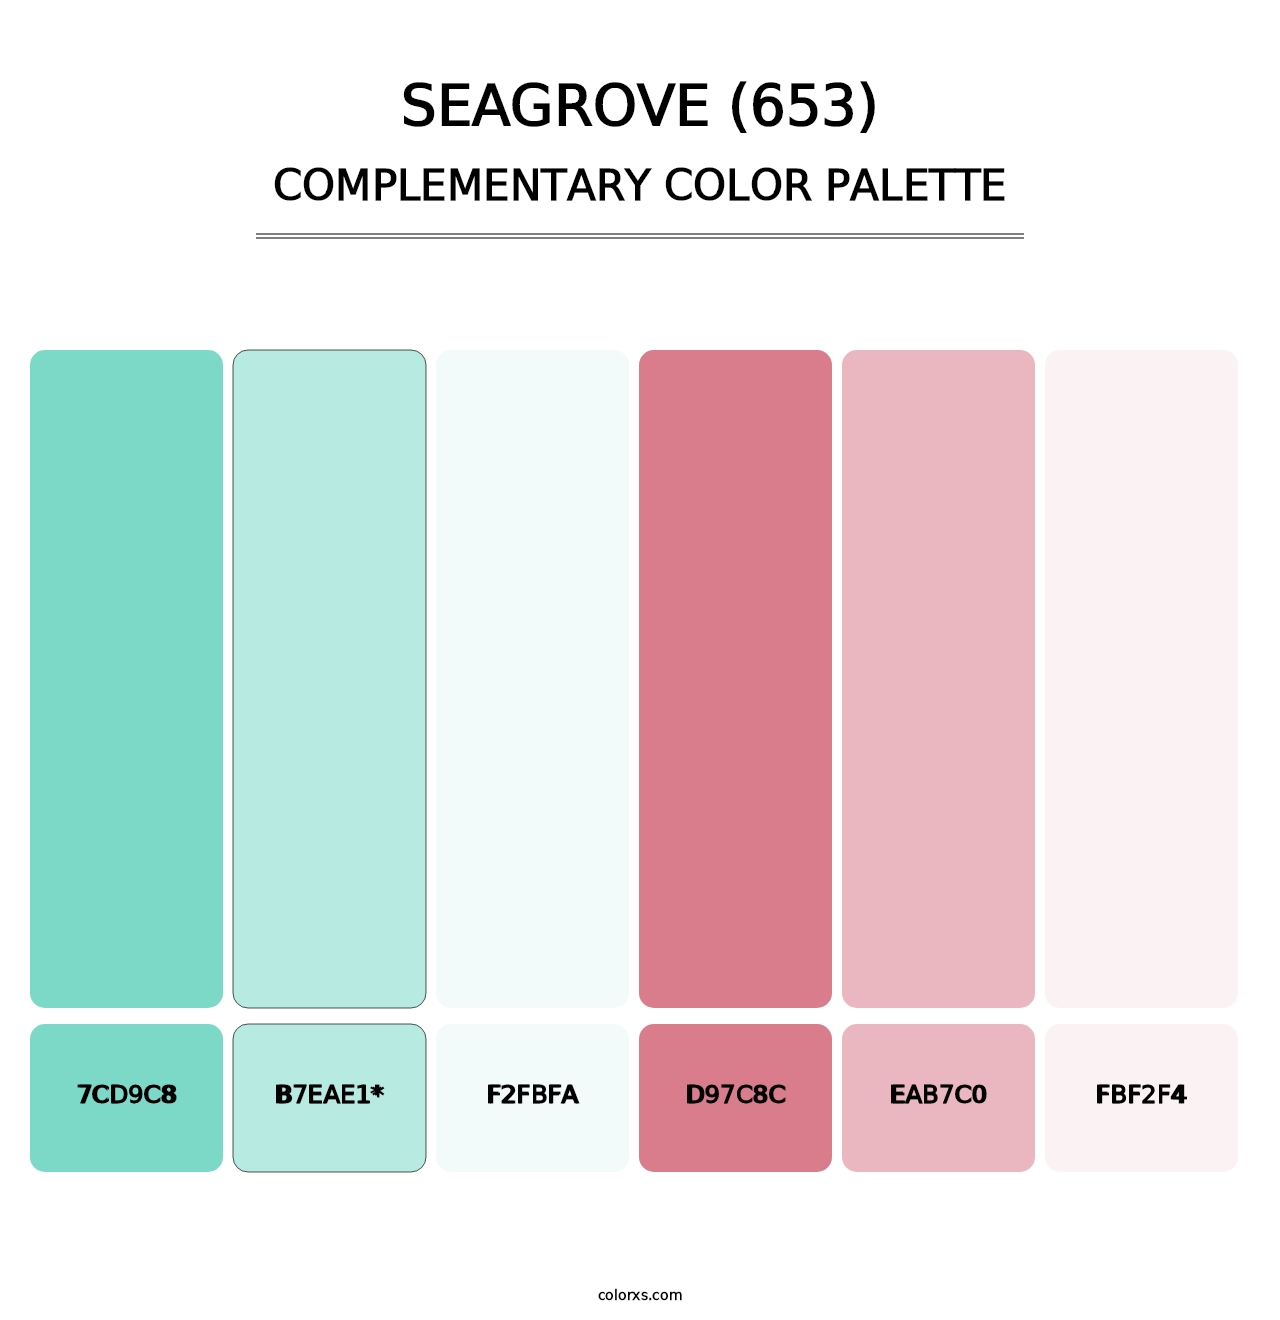 Seagrove (653) - Complementary Color Palette